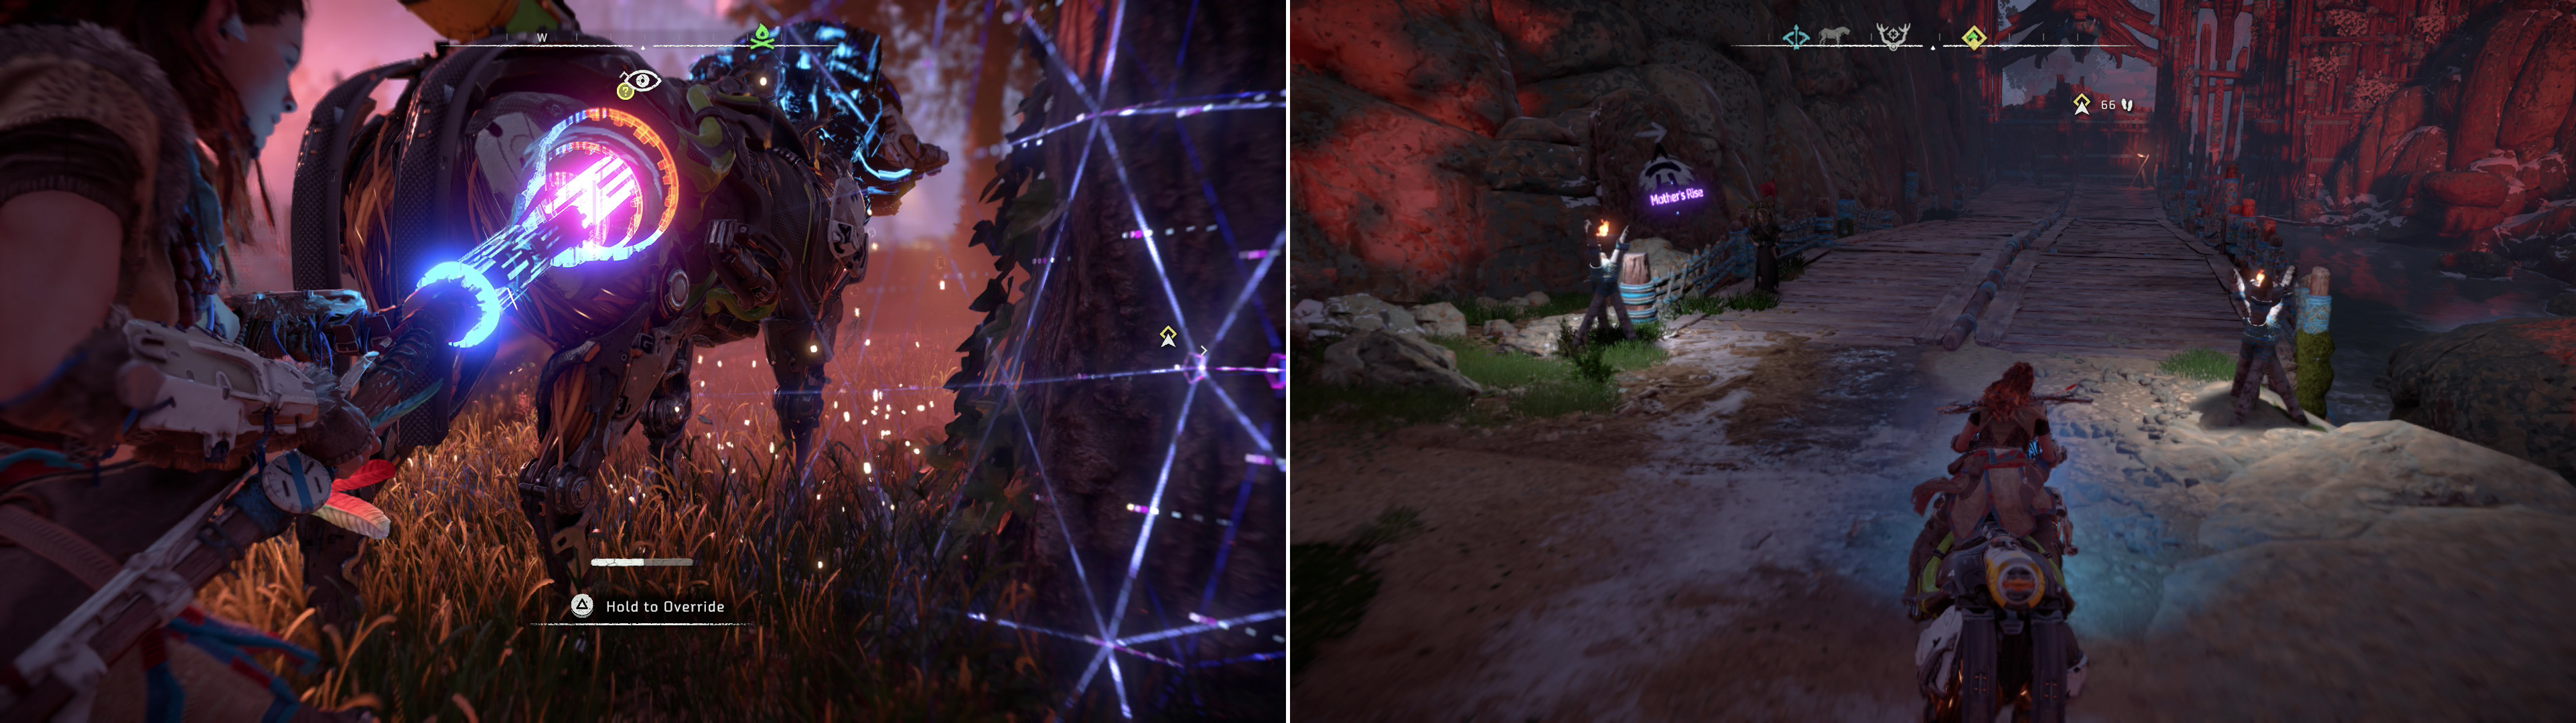 Use the device you got from the Corruptor to override a Strider (left), then ride it to the Main Embrace Gate (right).